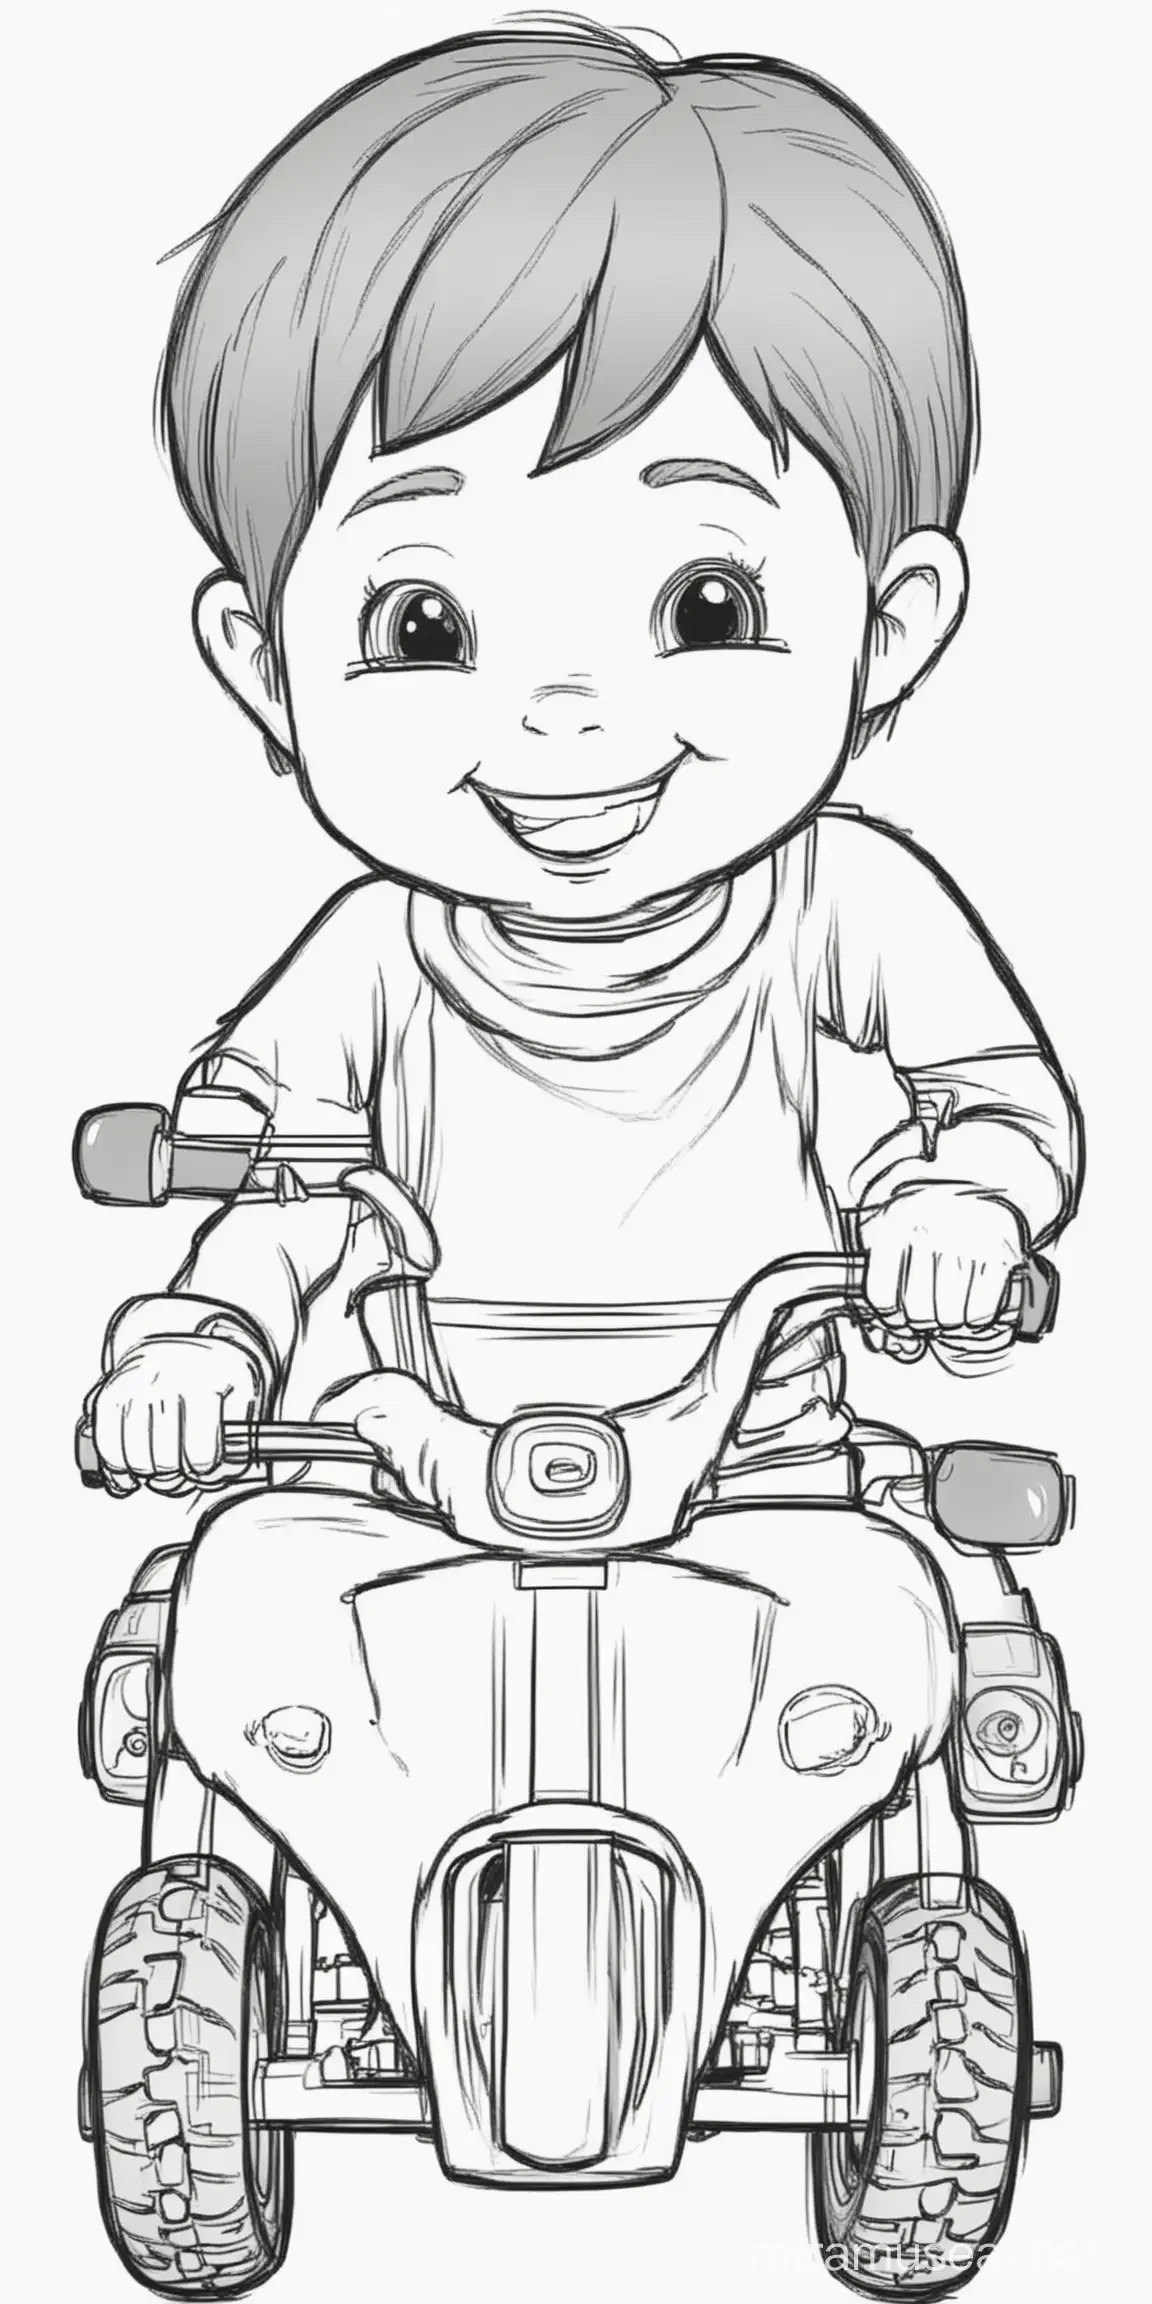 Very easy coloring page for 3 years old toddler. Smile cartoon motor. Without shadows. Thick black outline, without colors and big  details. White background.